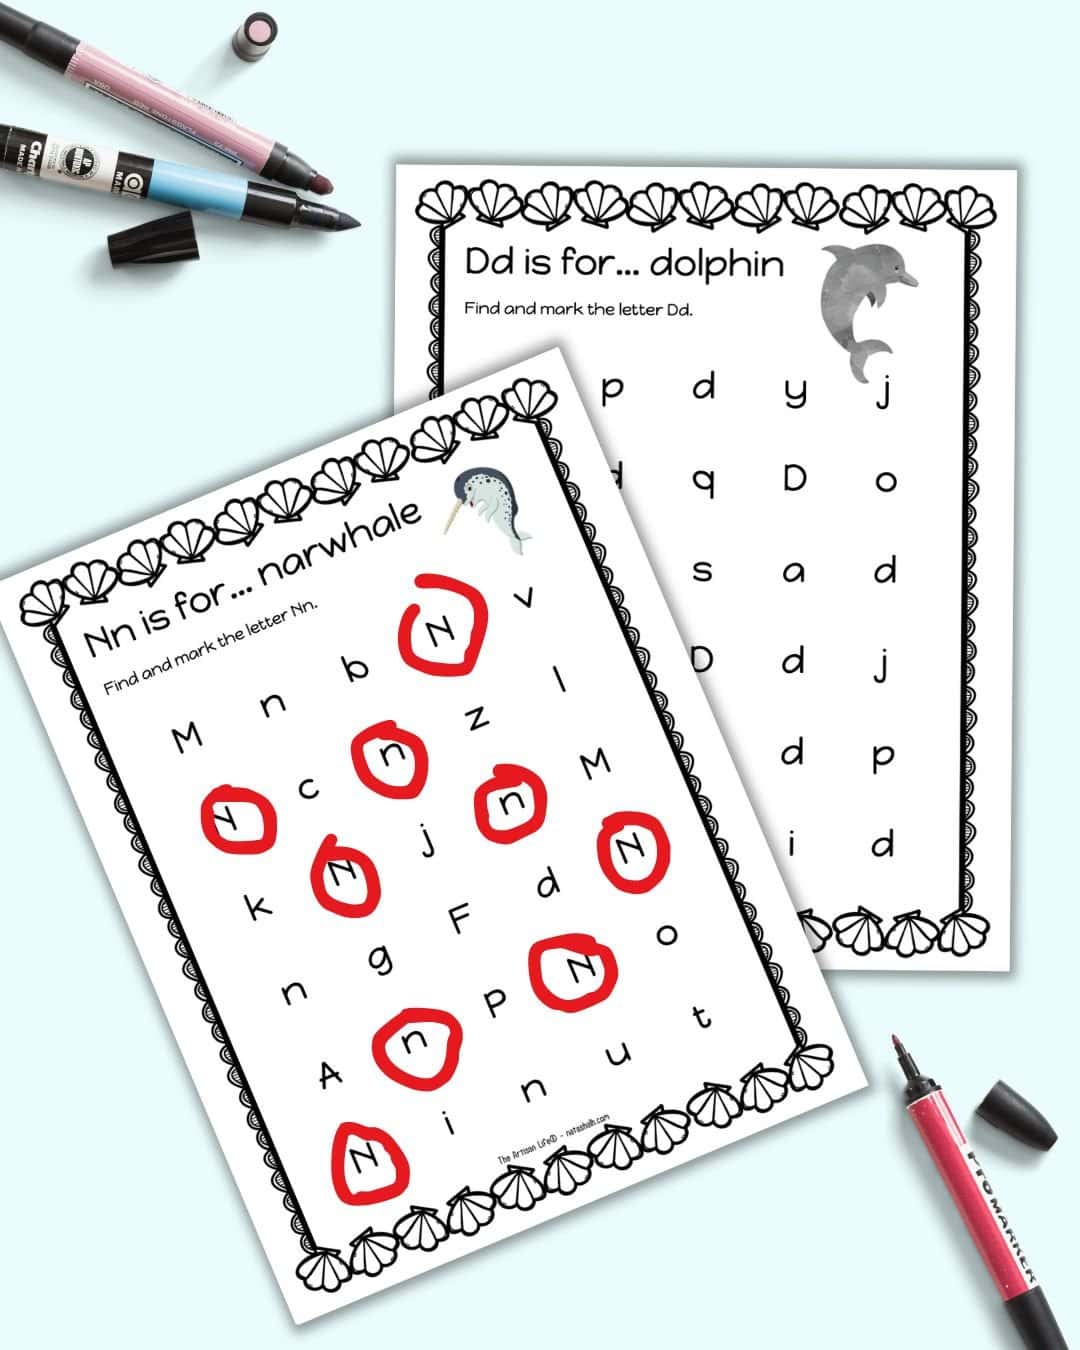 A preview of two ocean themed alphabet letter find worksheets. The page on top has letters N and n circled in red